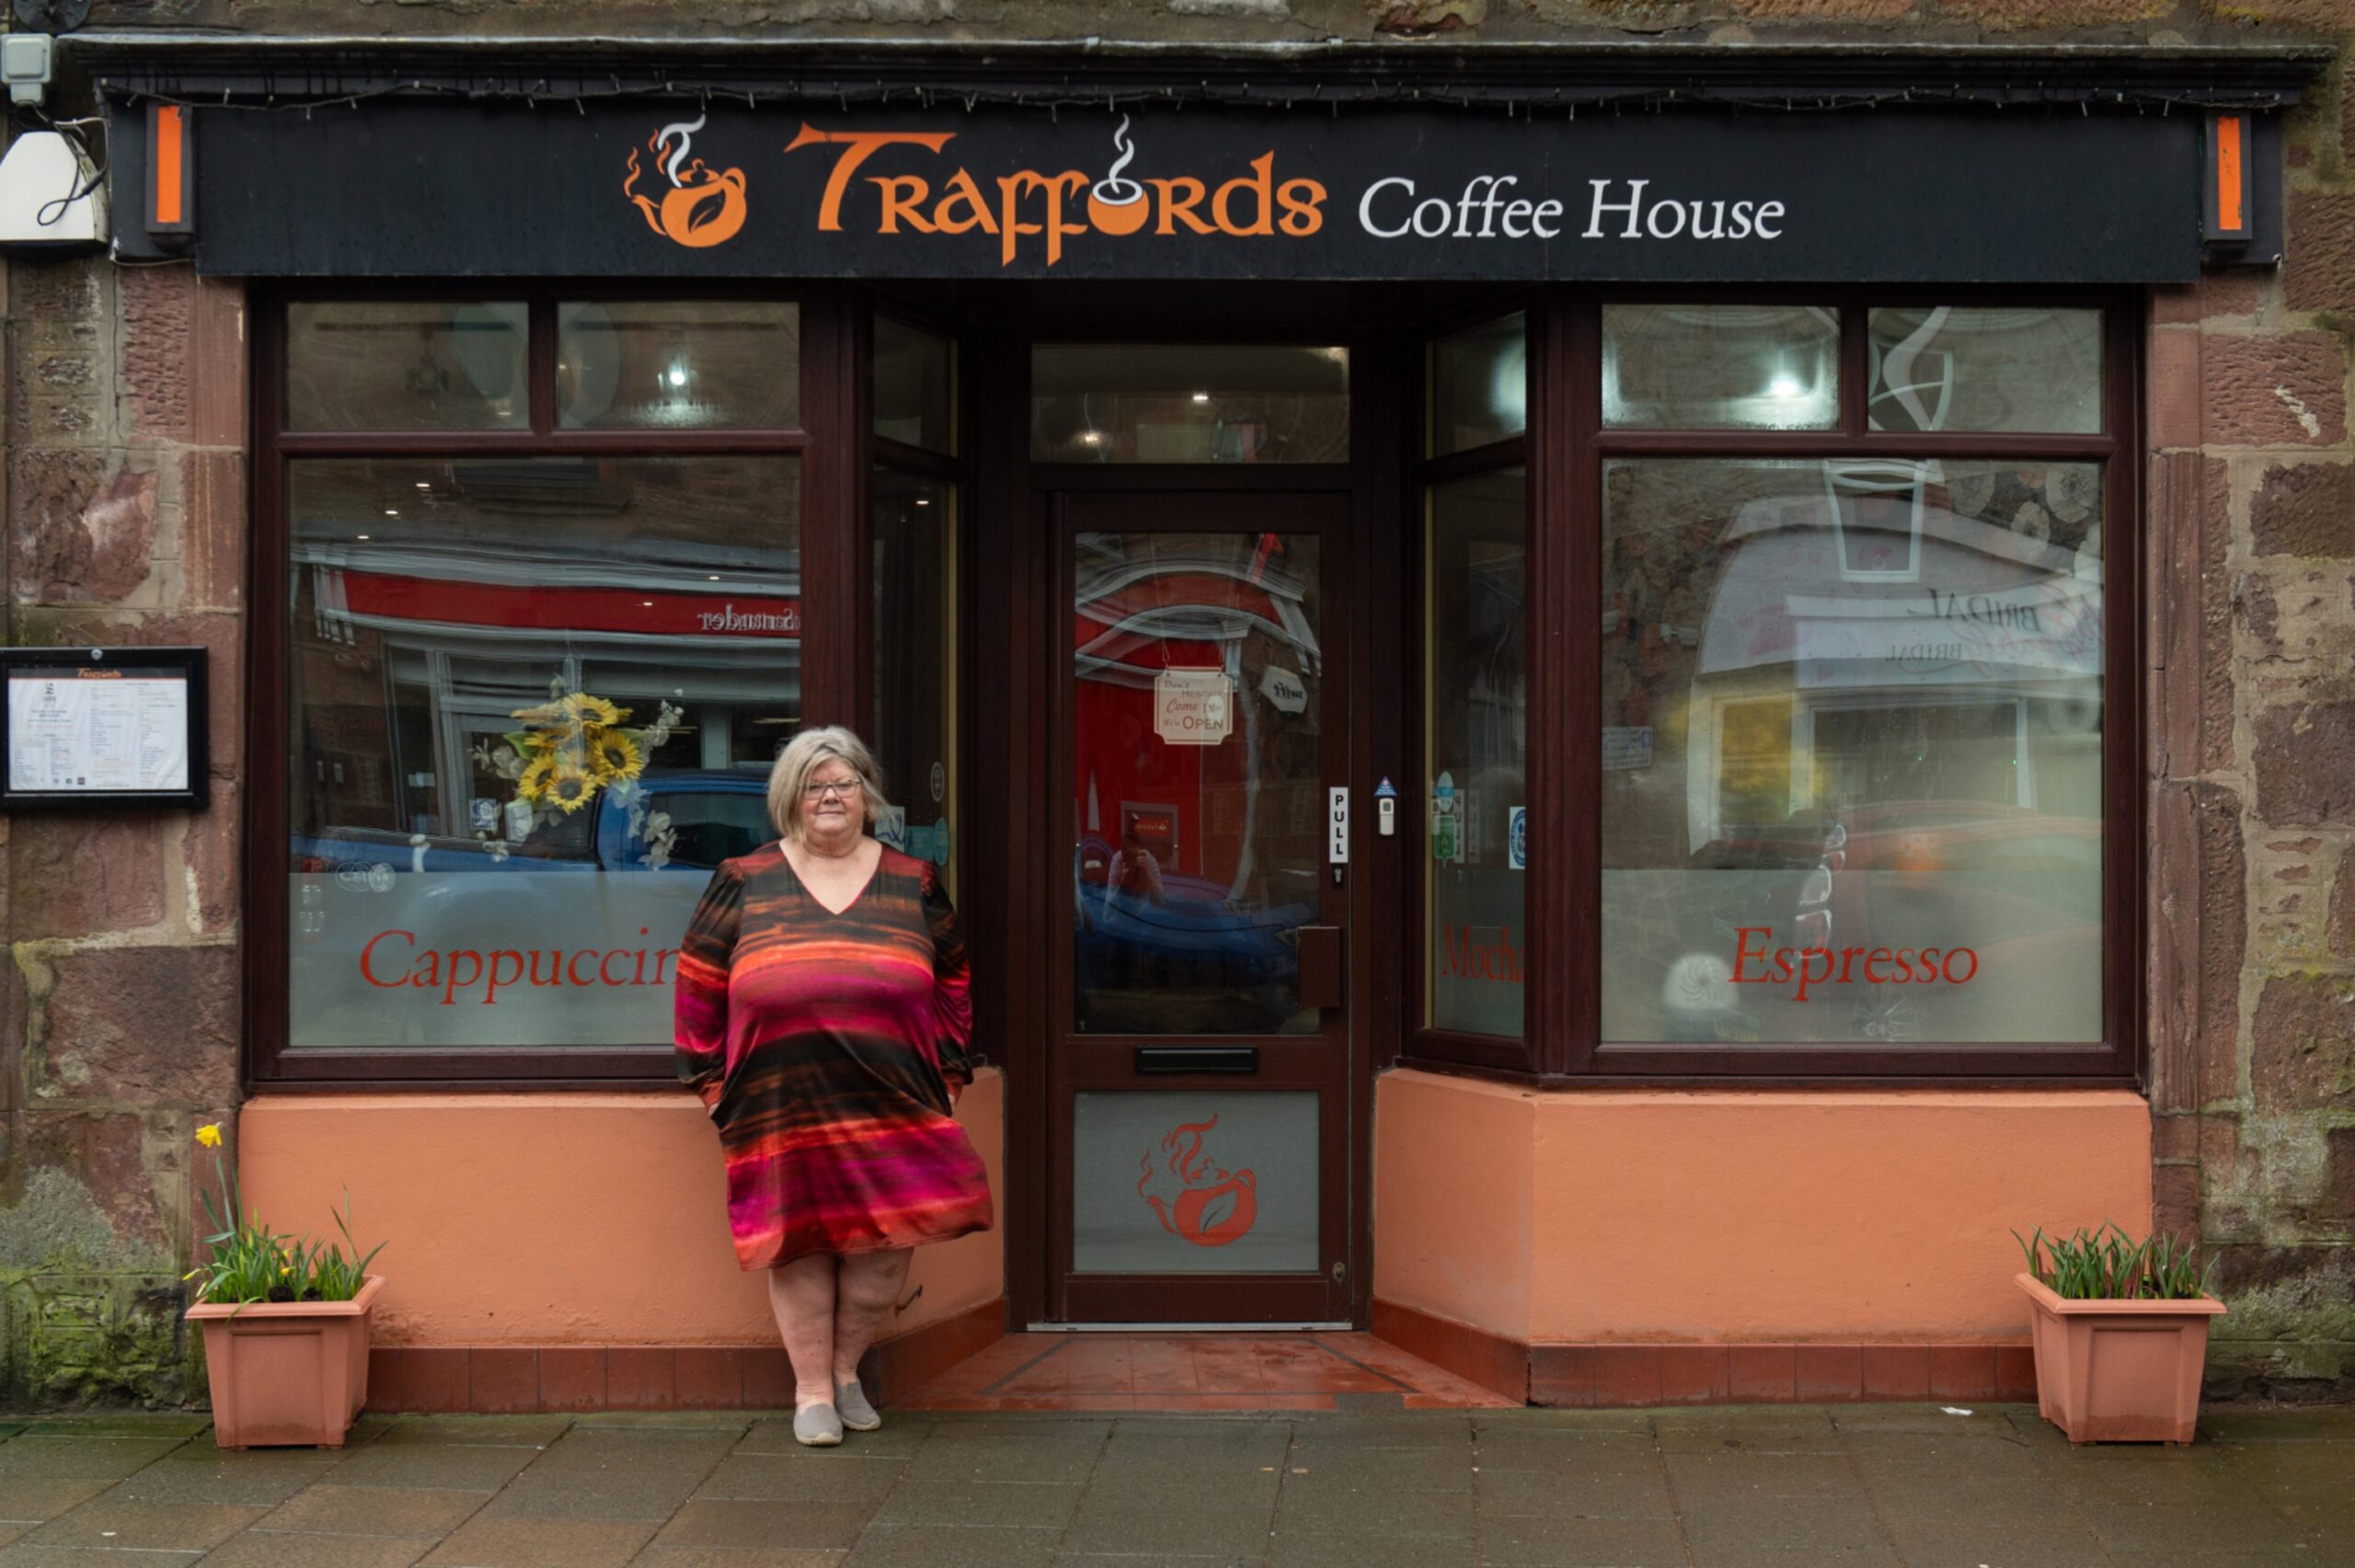 Marjory Chalmers outside her award-winning cafe Traffords Coffee House, located on High Street, Turriff.